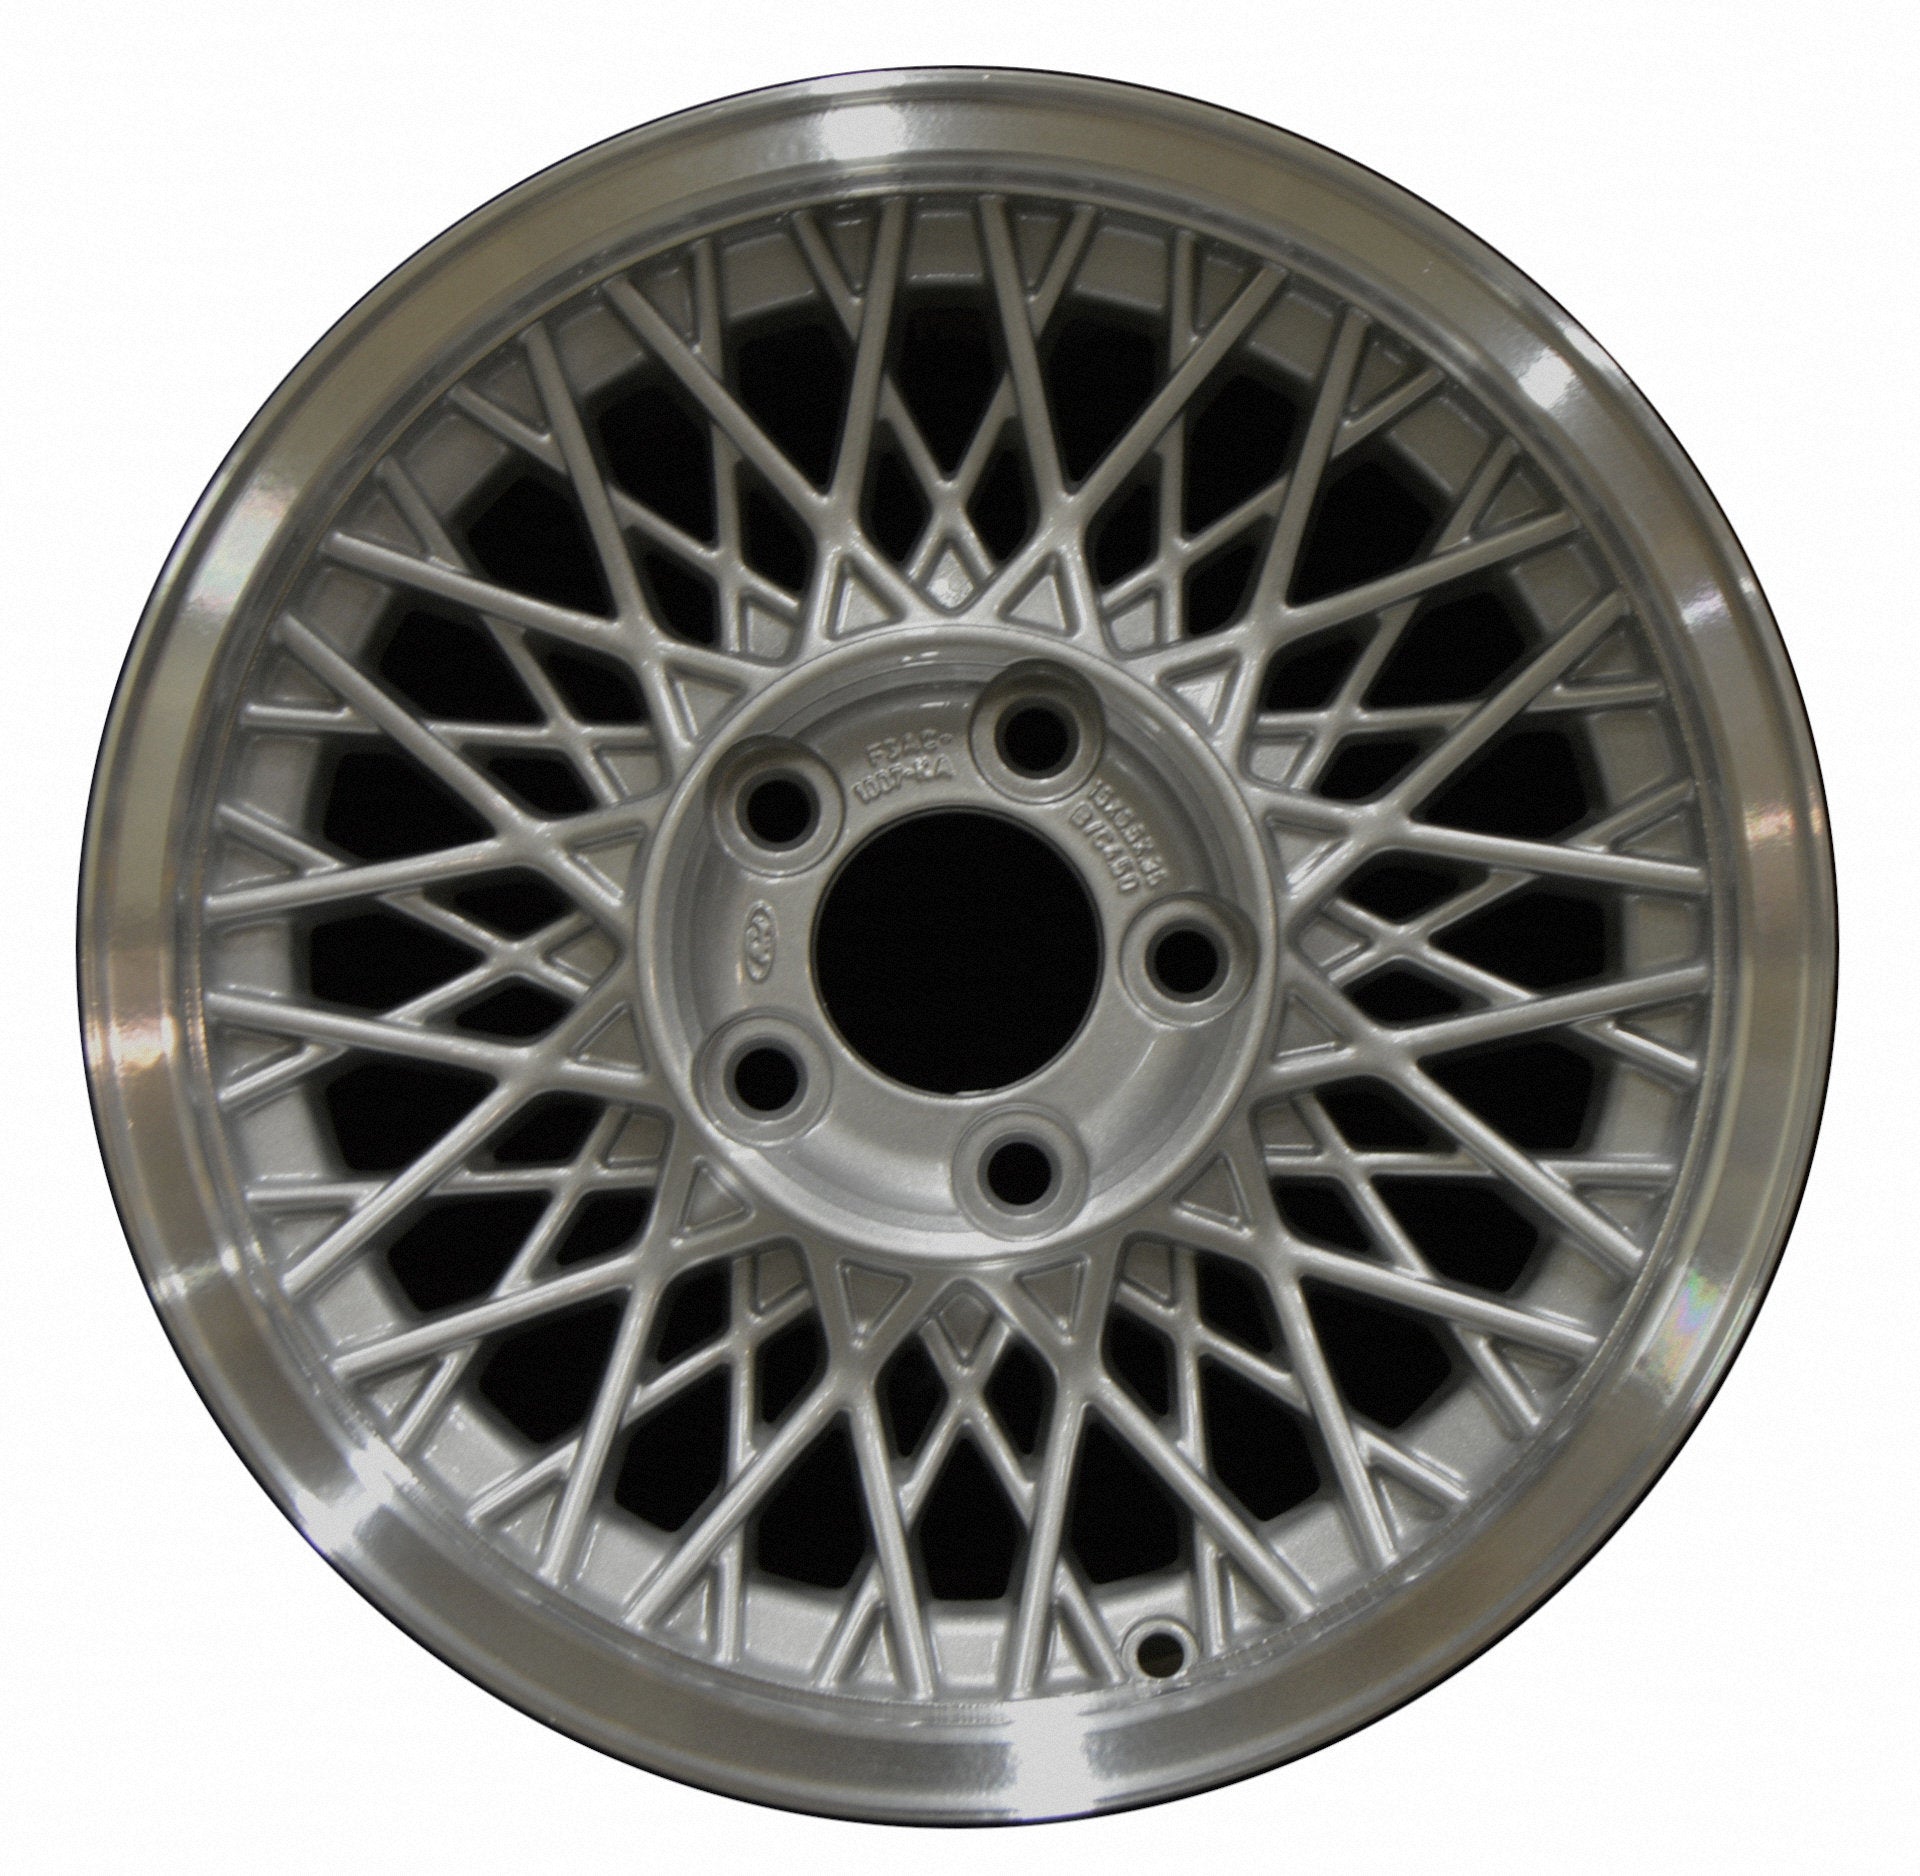 Ford Crown Victoria  1993, 1994, 1995, 1996 Factory OEM Car Wheel Size 15x6.5 Alloy WAO.3054.PS02.FC